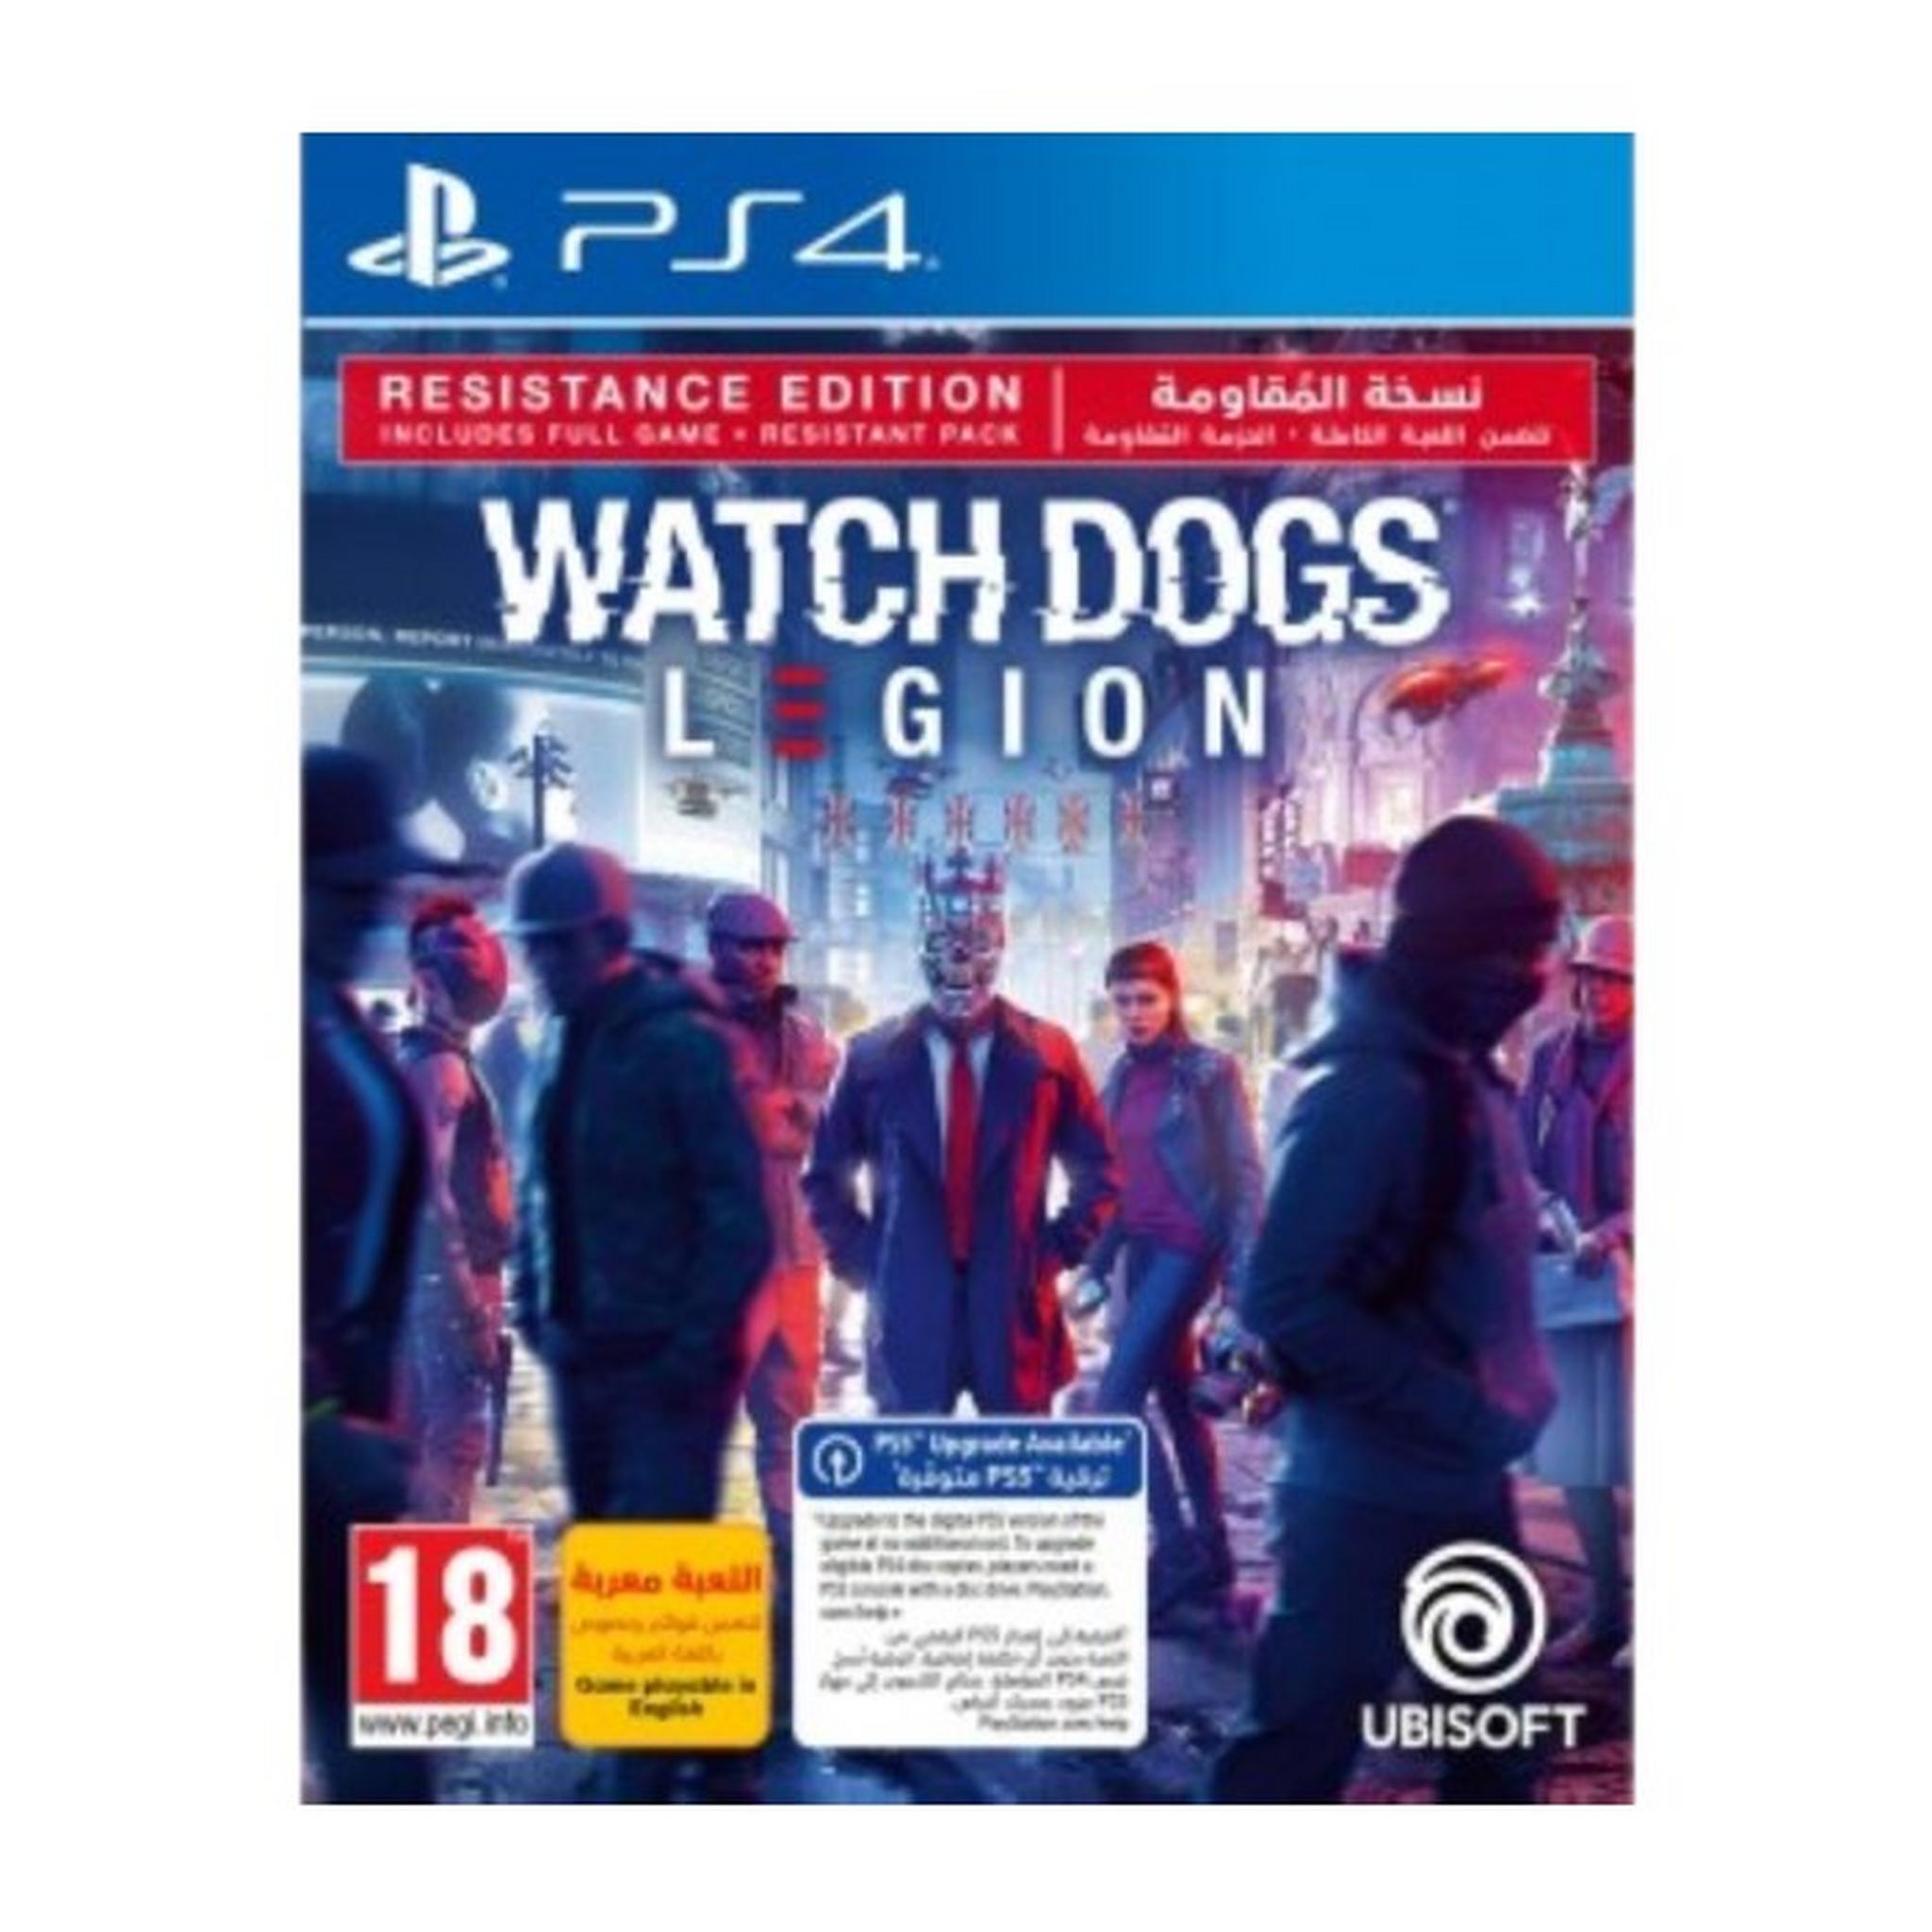 Watch Dogs Legion: Resistance Edition - PlayStation 4 Game